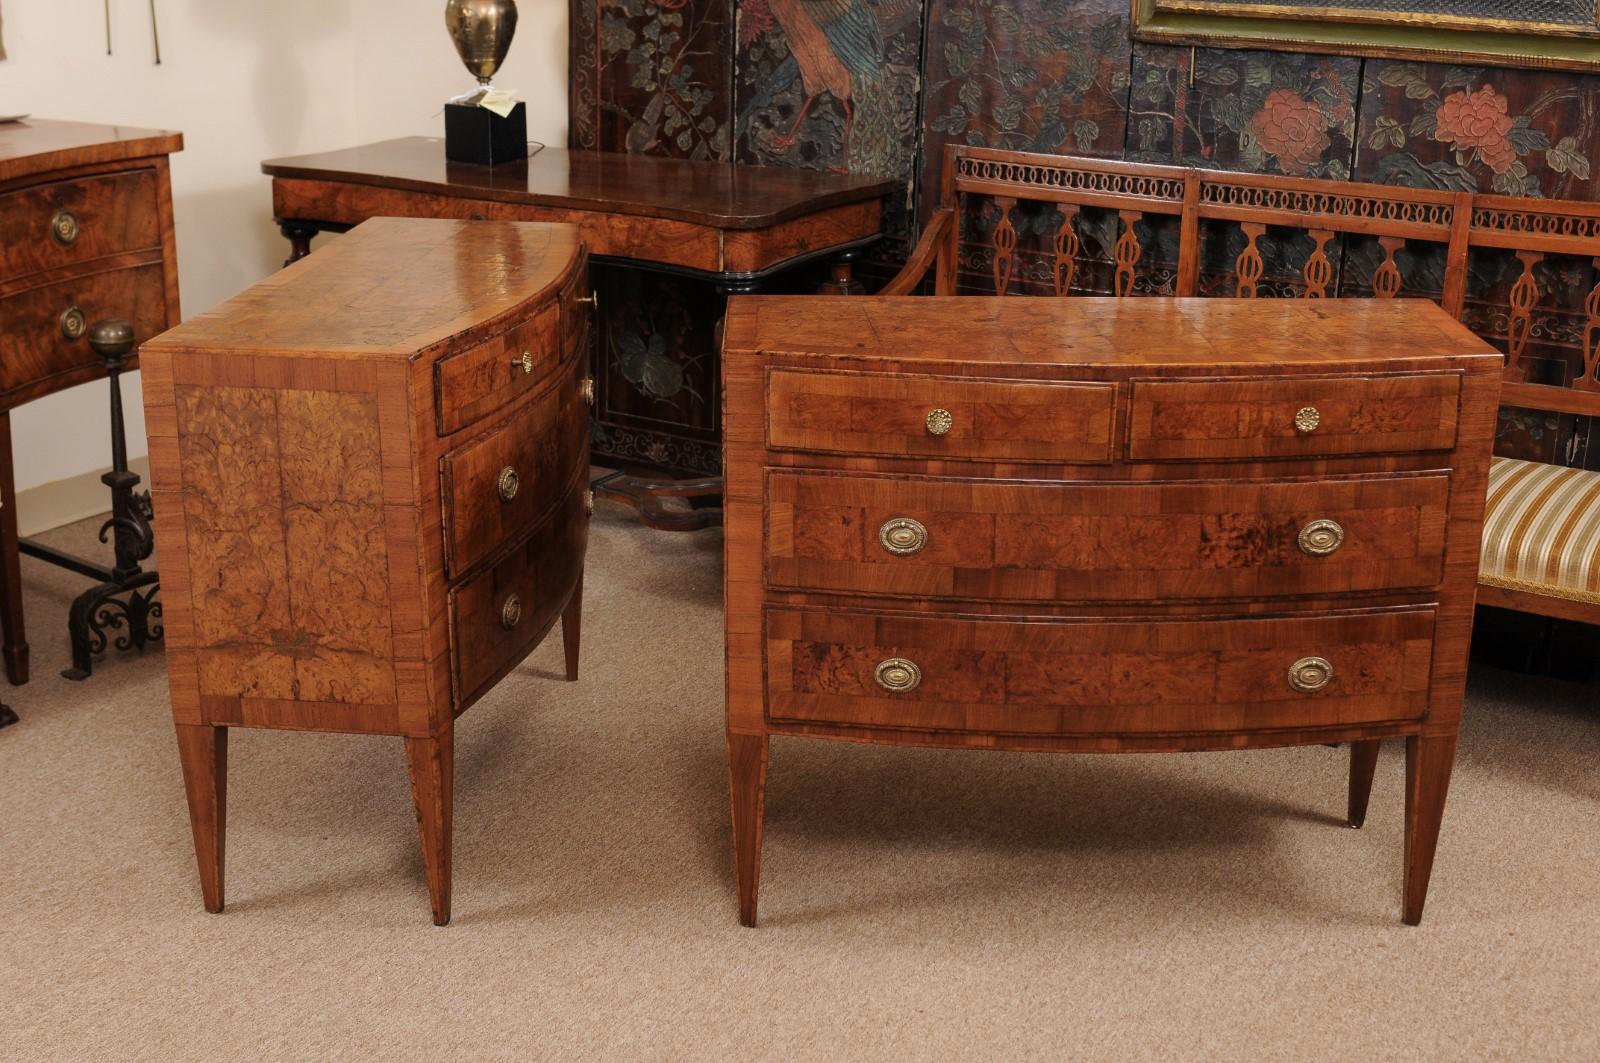 The pair of neoclassical style burled walnut Italian commodes with bow-fronts, 2 small drawers and 2 long drawers below terminating in tapered legs.